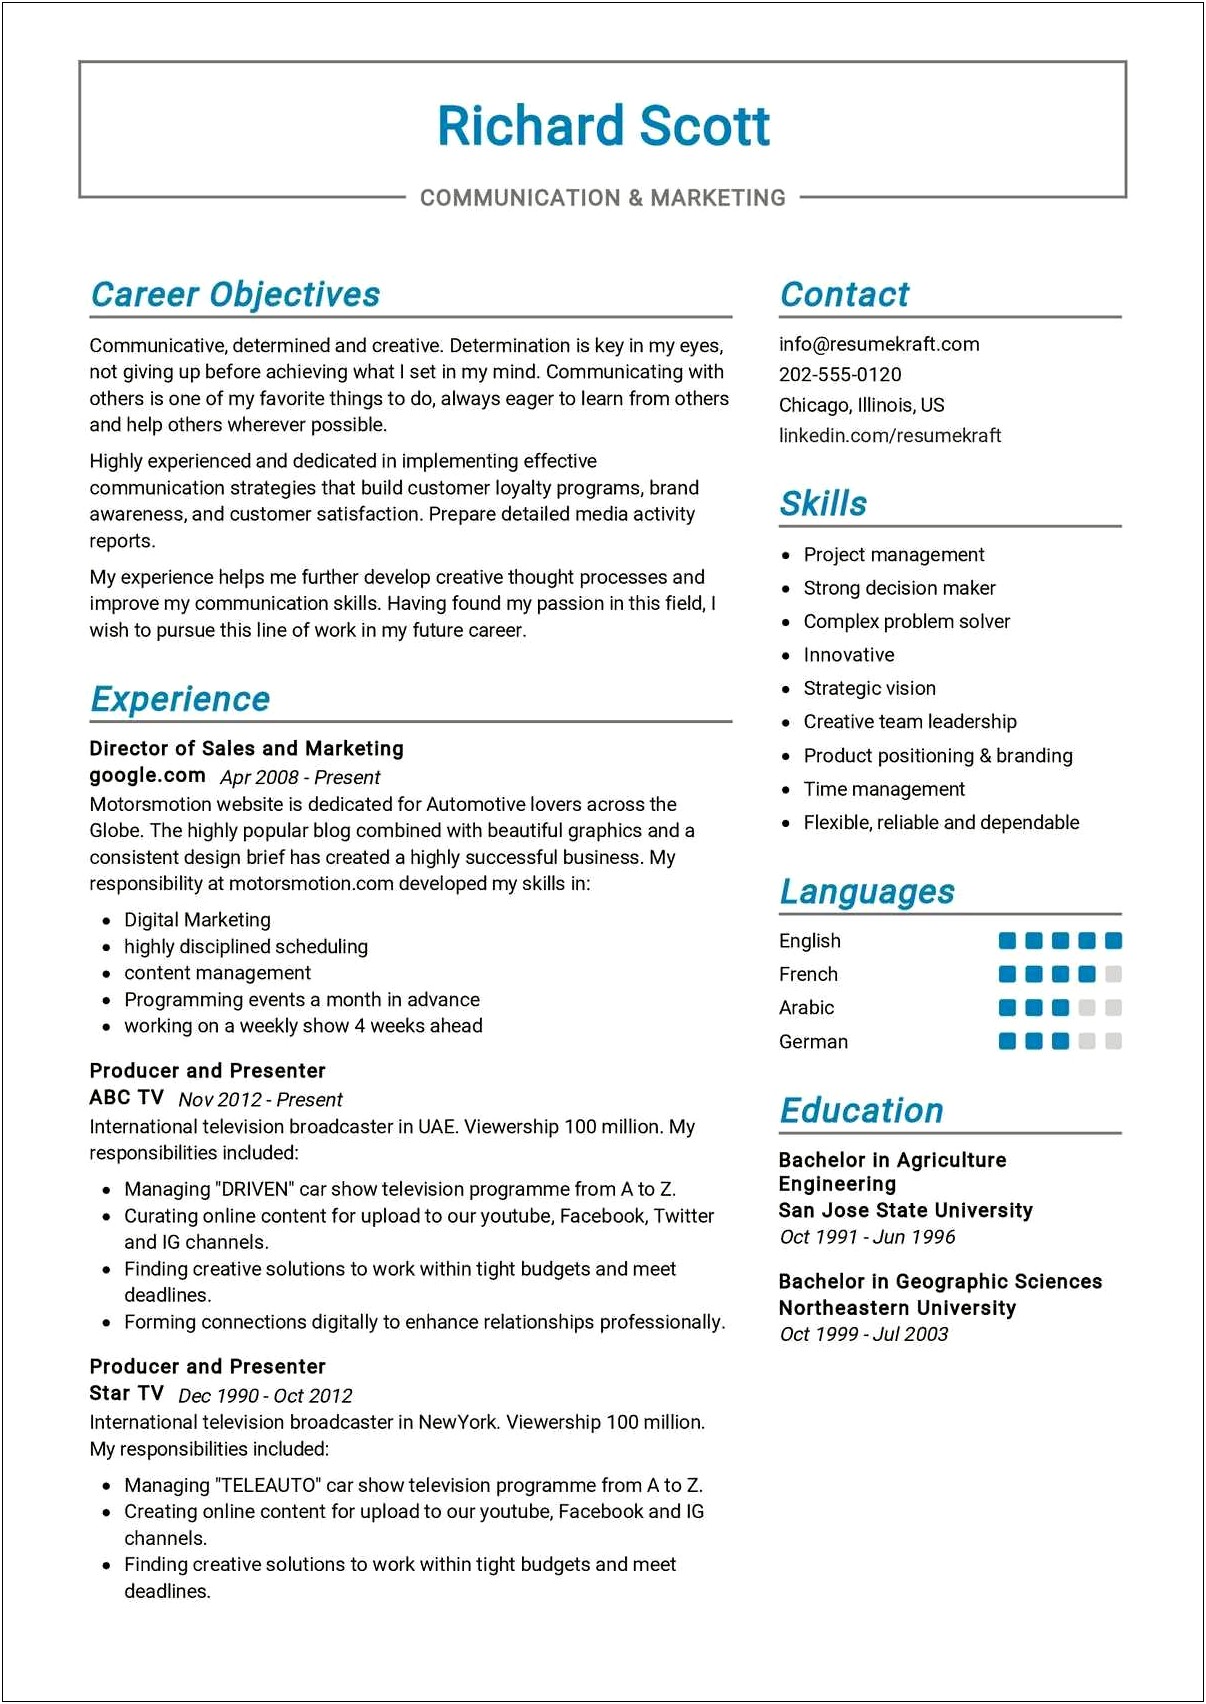 Director Of Marketing And Commications Resume Sample